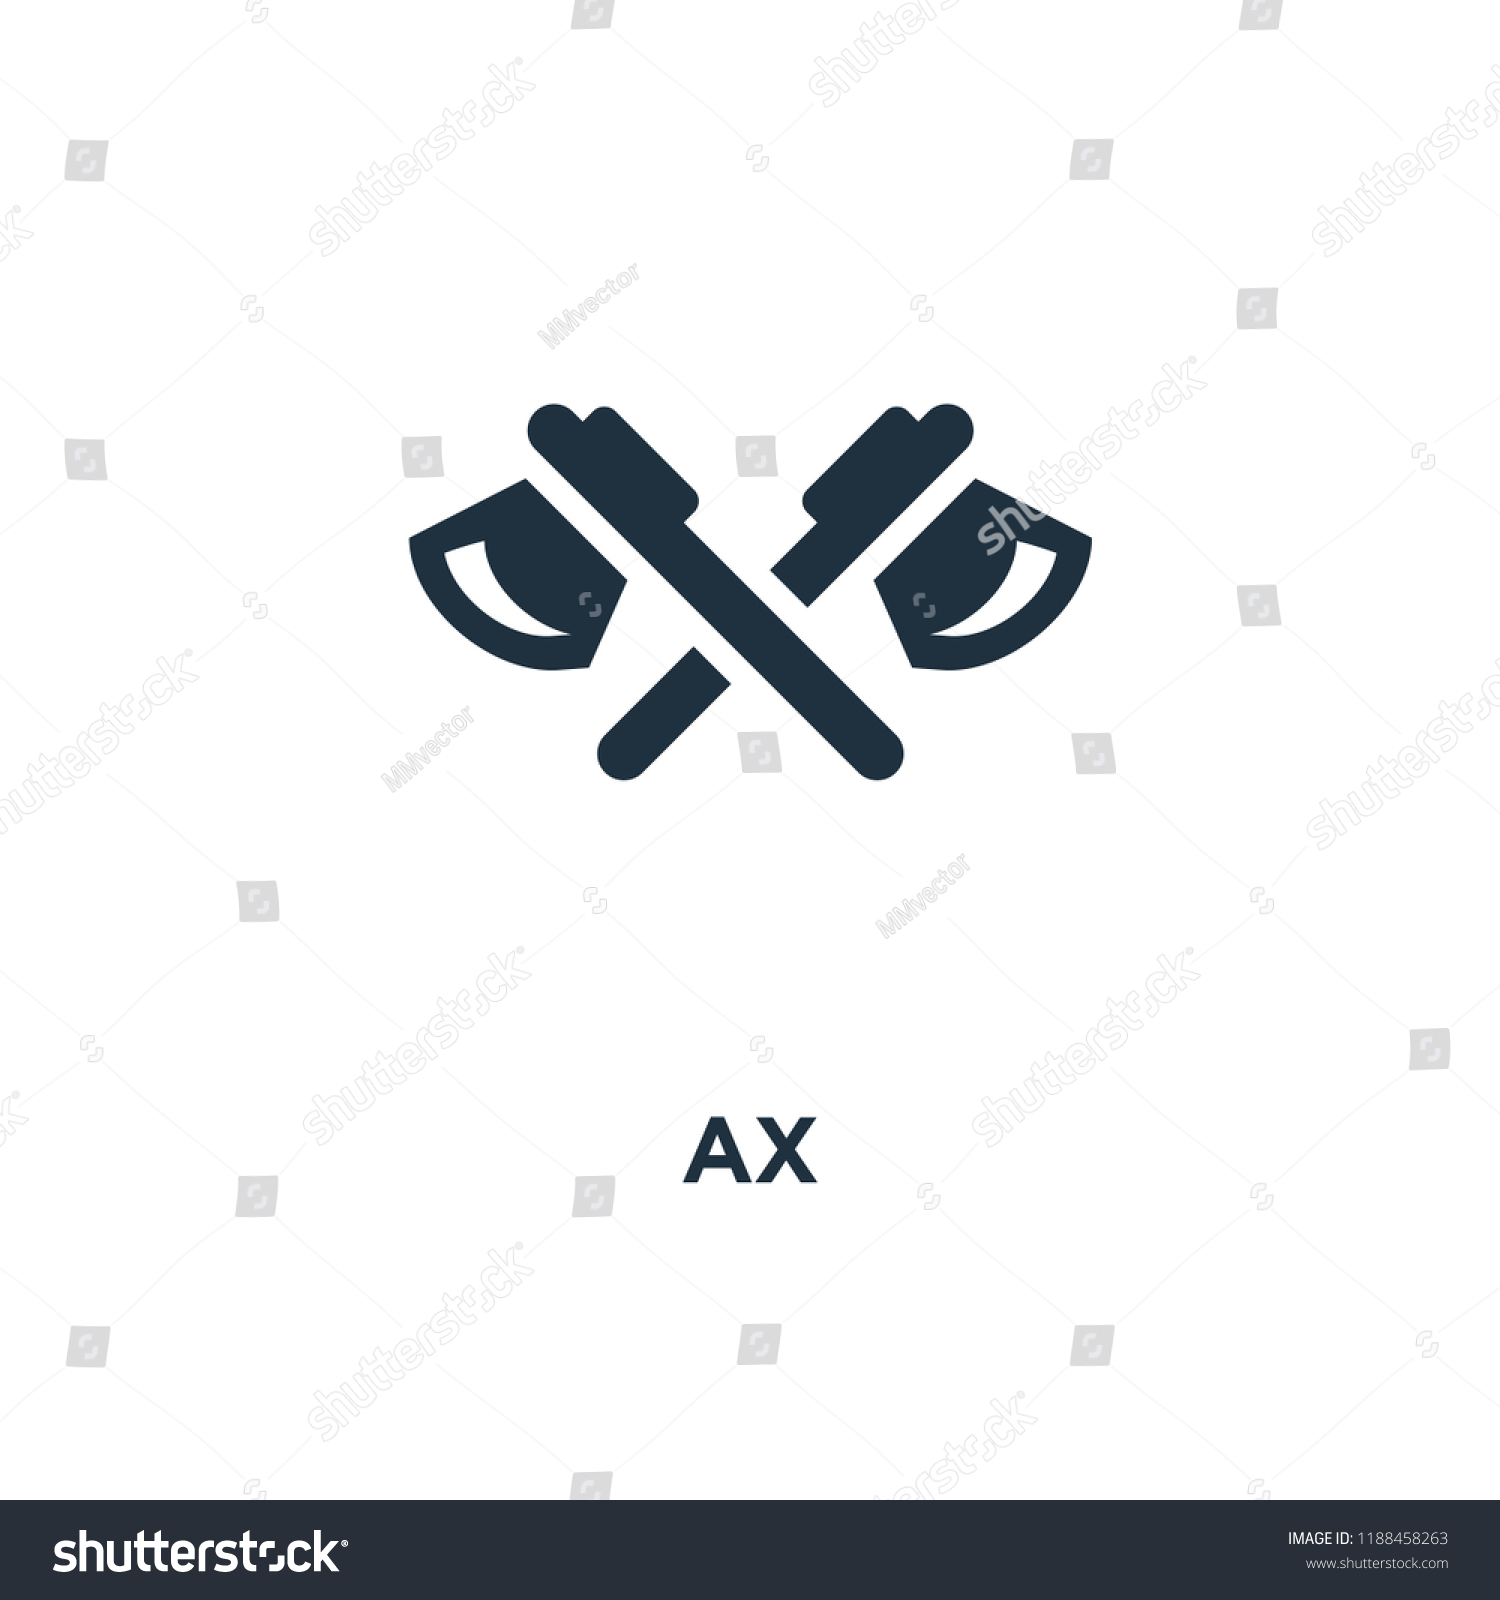 SVG of Ax icon. Black filled vector illustration. Ax symbol on white background. Can be used in web and mobile. svg